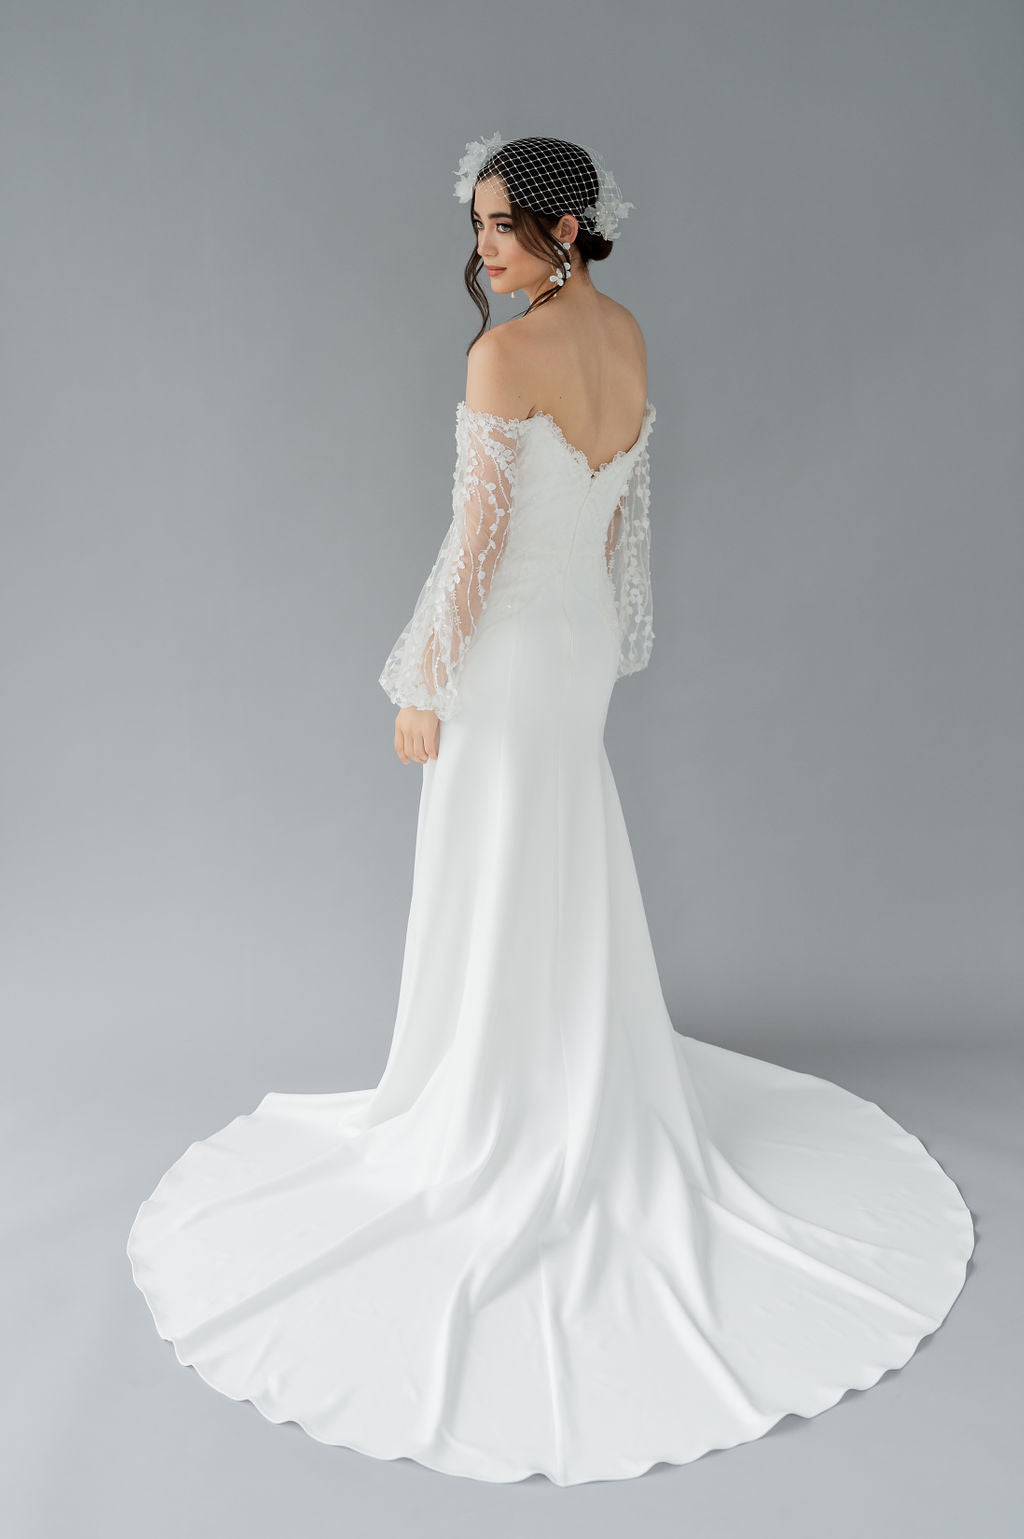 Modern fit and flare wedding dress with long 3D lace poet sleeves. Off the shloulder, crepe skirt. Designed and made in Canada by Catherine Langlois.